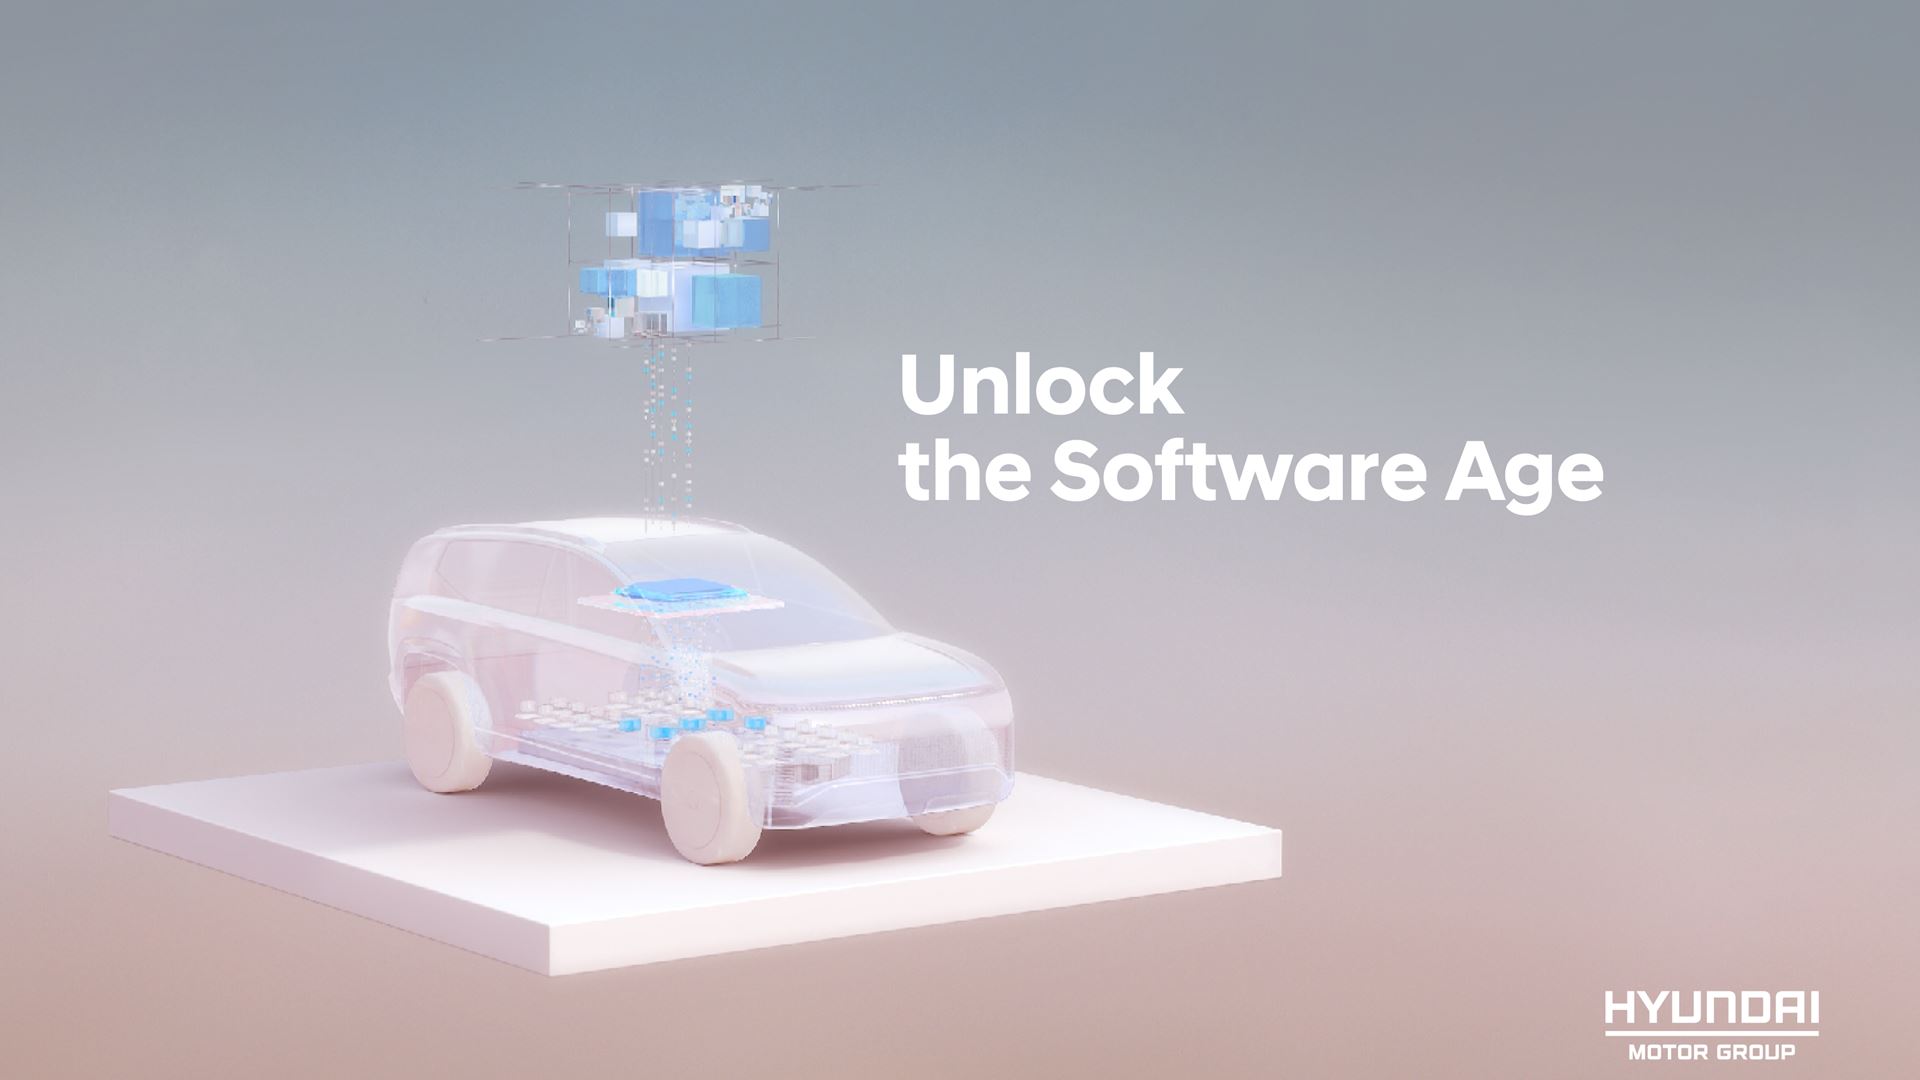 Hyundai Motor Group Announces Future Roadmap for  Software Defined Vehicles at Unlock the Software Age Global Forum